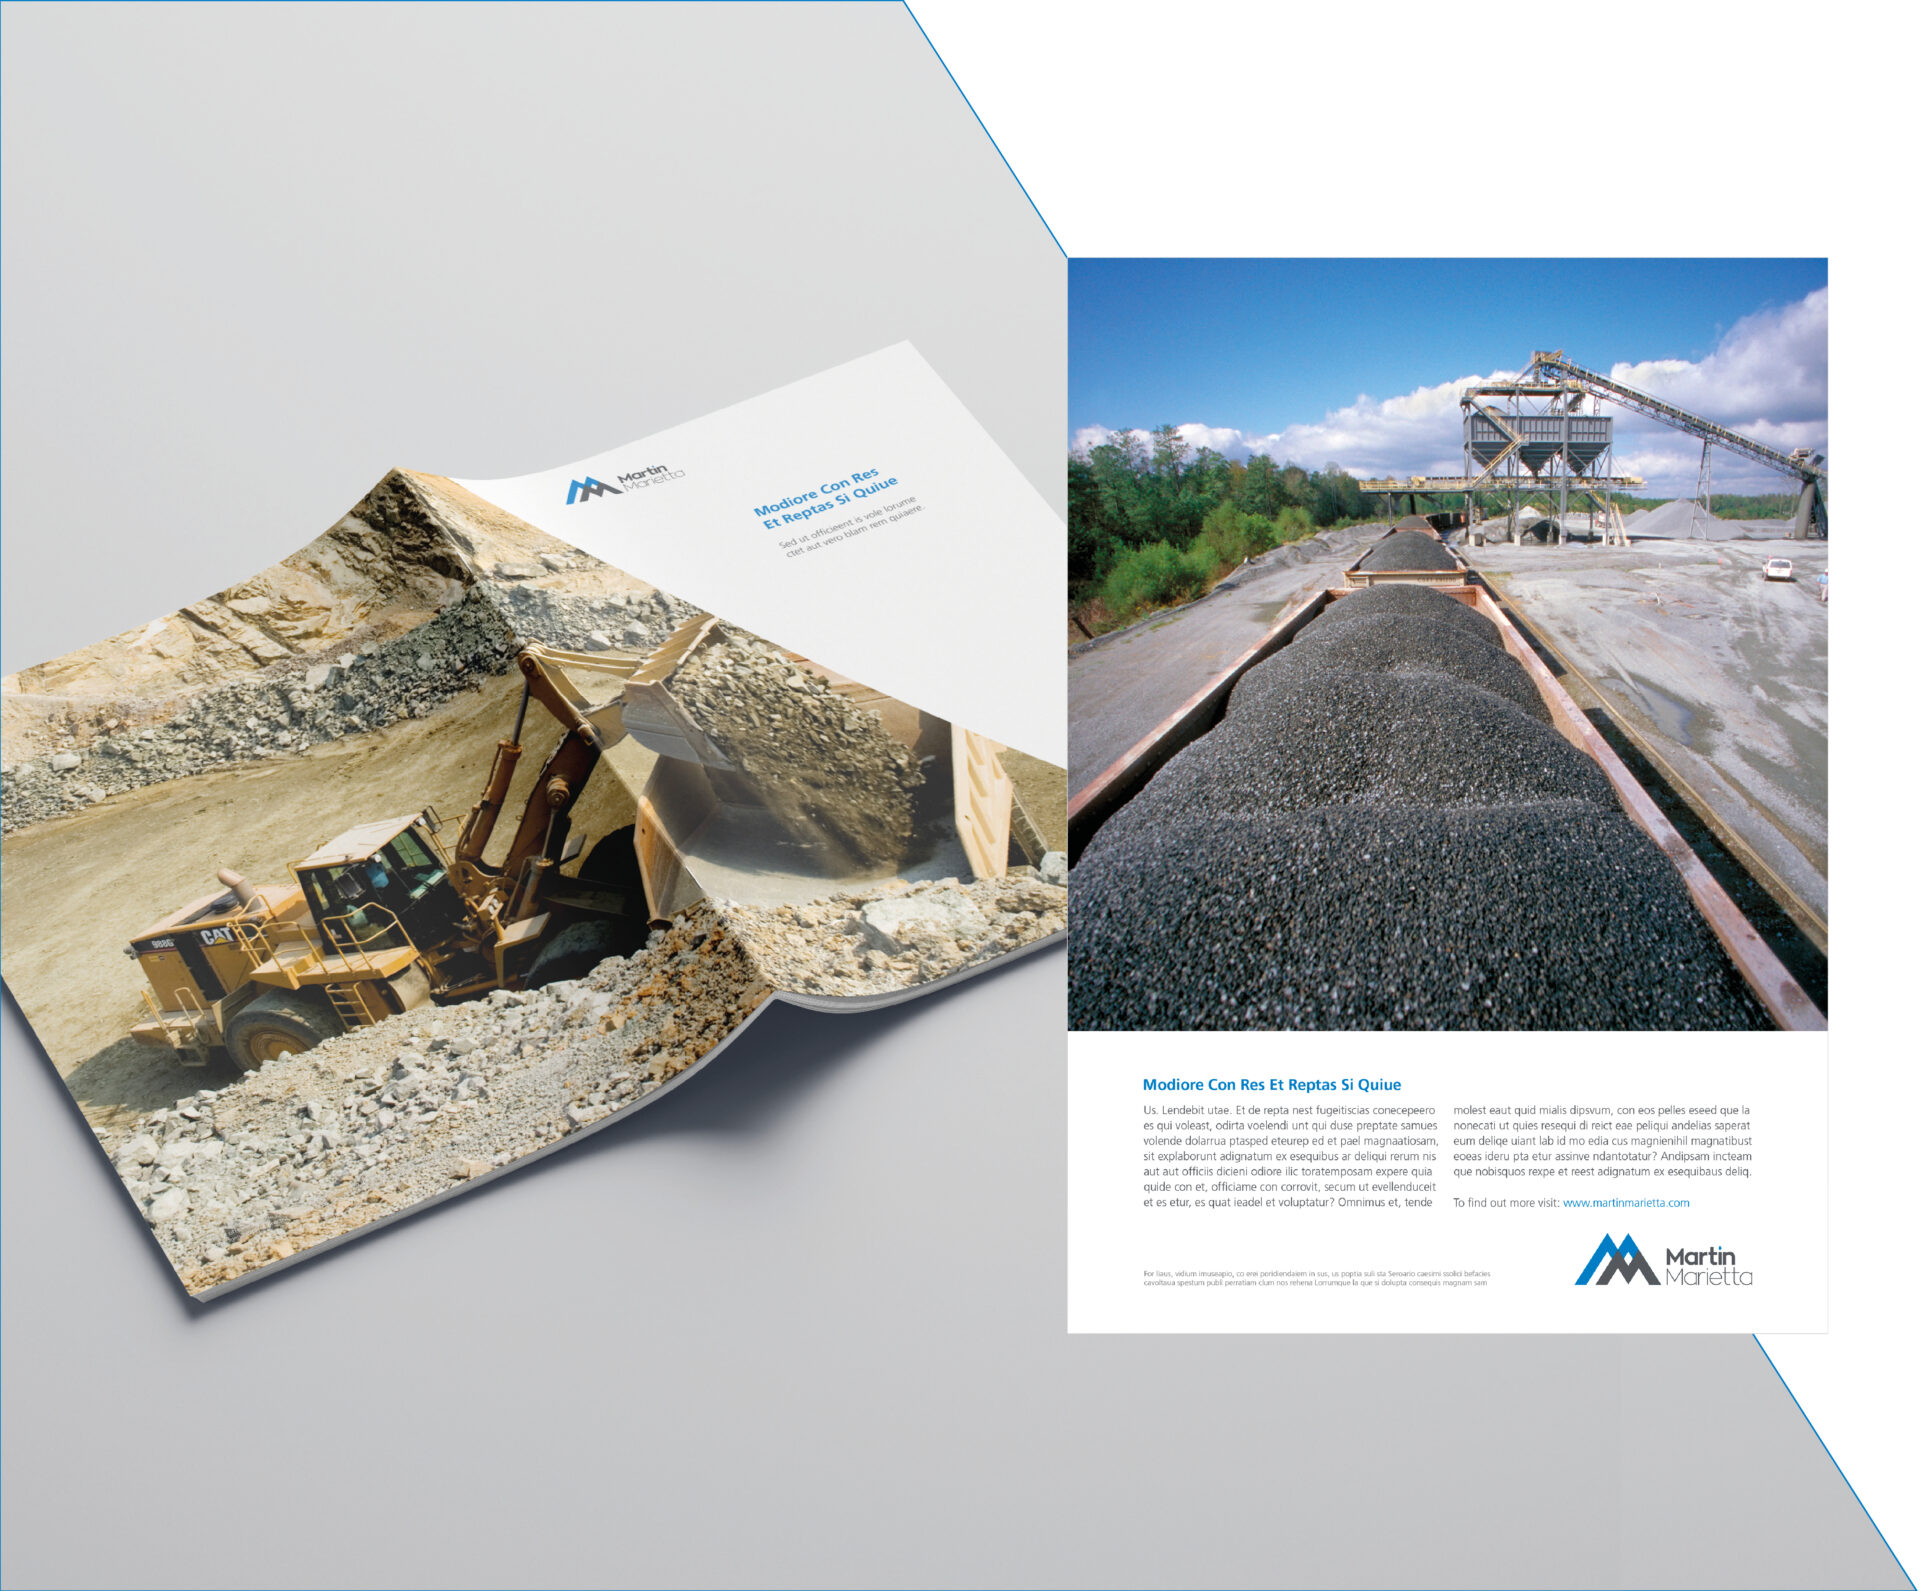 Examples of Martin Marietta communication materials, including brochure cover and advertisement